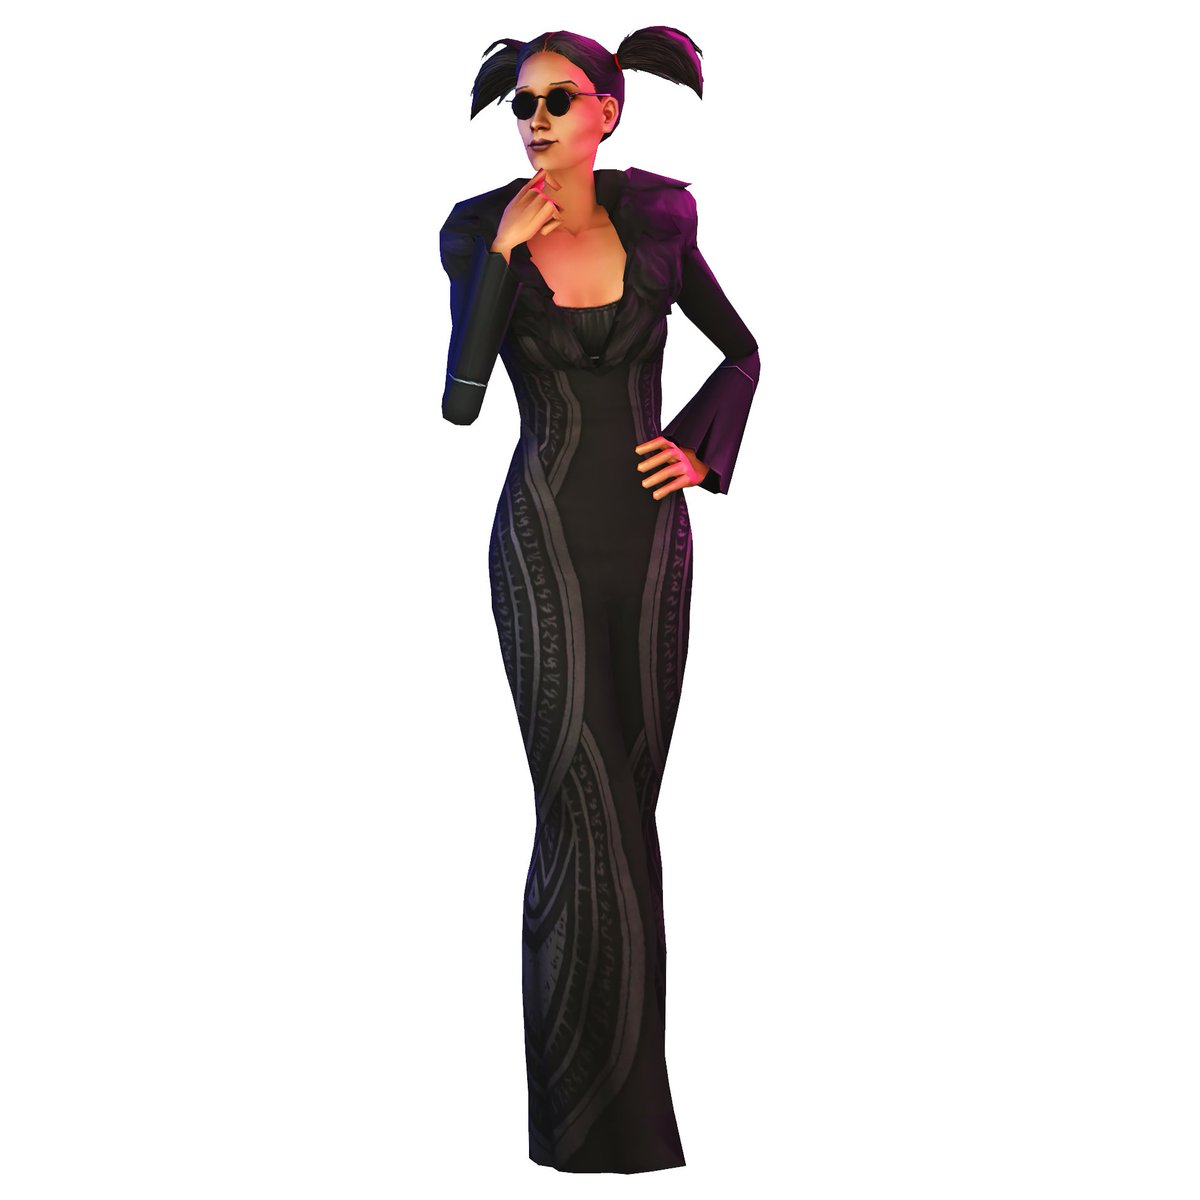 Miss Goth! 🖤📷 #thesims2 #ts2 #TheSims  #cassandragoth #simscommunity